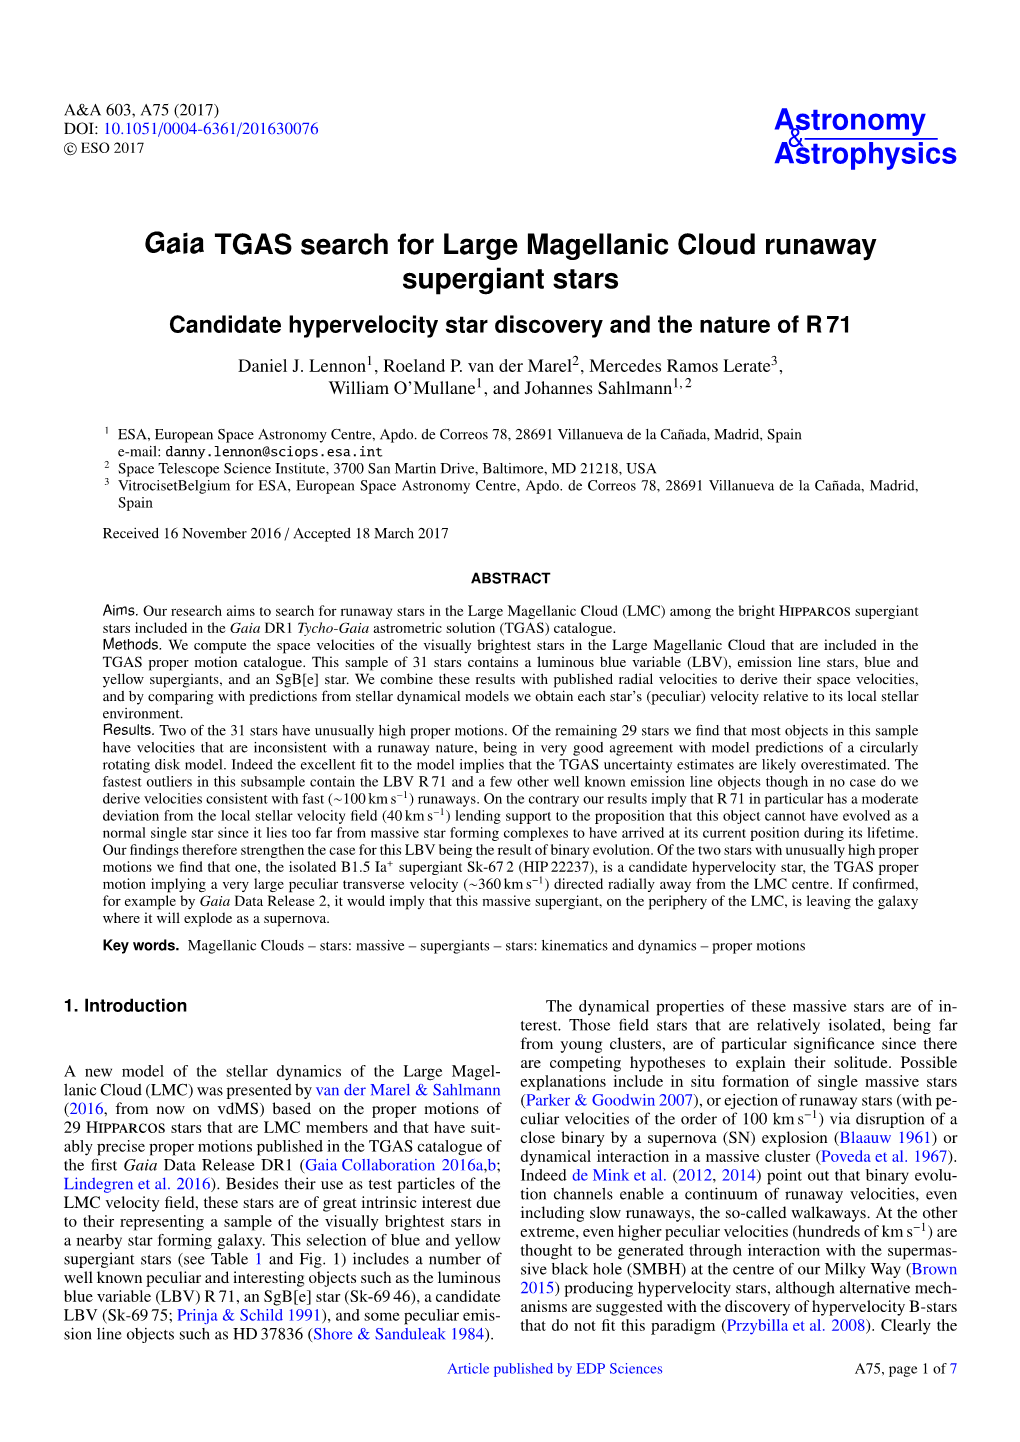 Gaia TGAS Search for Large Magellanic Cloud Runaway Supergiant Stars Candidate Hypervelocity Star Discovery and the Nature of R 71